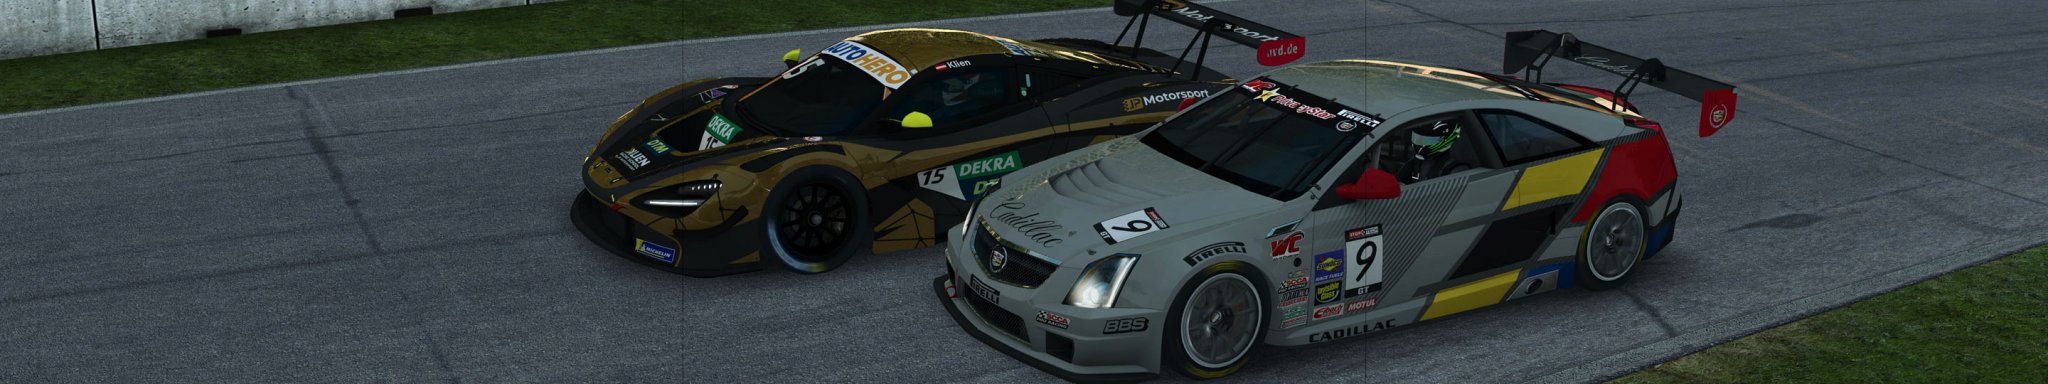 3 RACEROOM CADILLAC GT2 with P2 and 2021 DTM copy.jpg